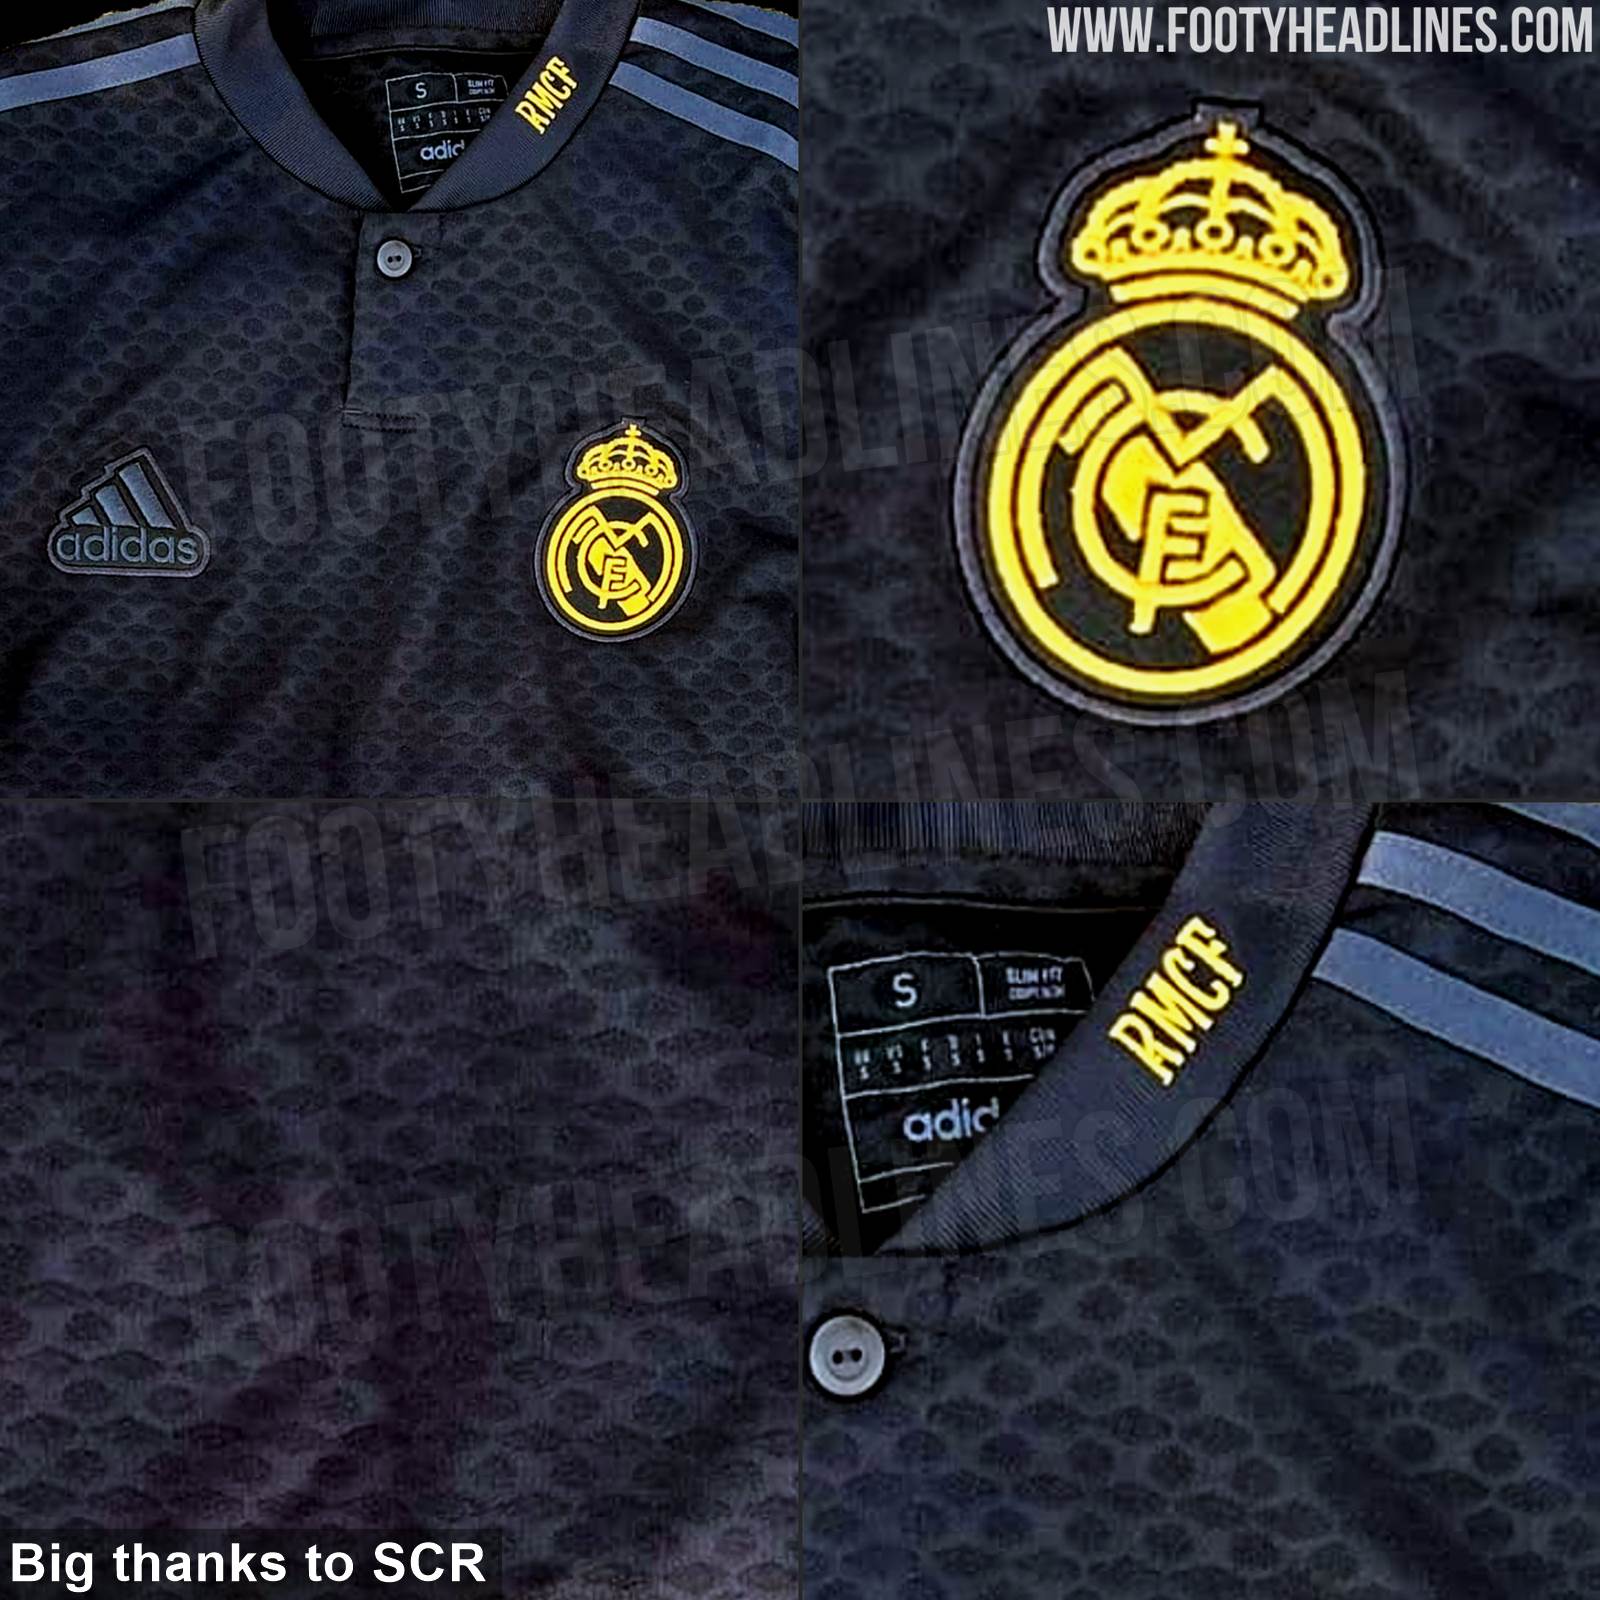 adidas Release Real Madrid 21/22 Third Shirt - SoccerBible